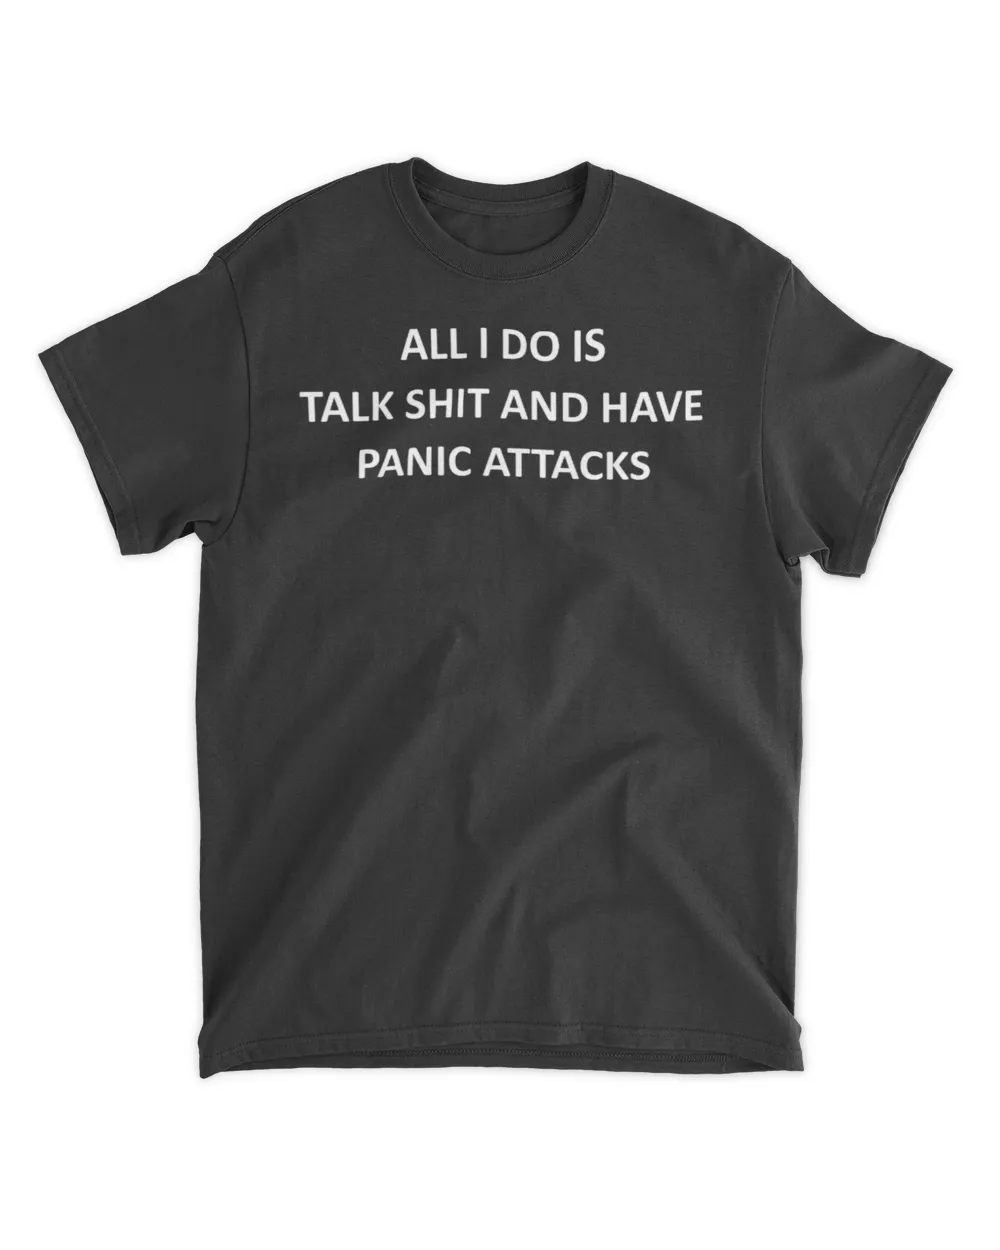  All I do is talk shit and have panic attacks shirt